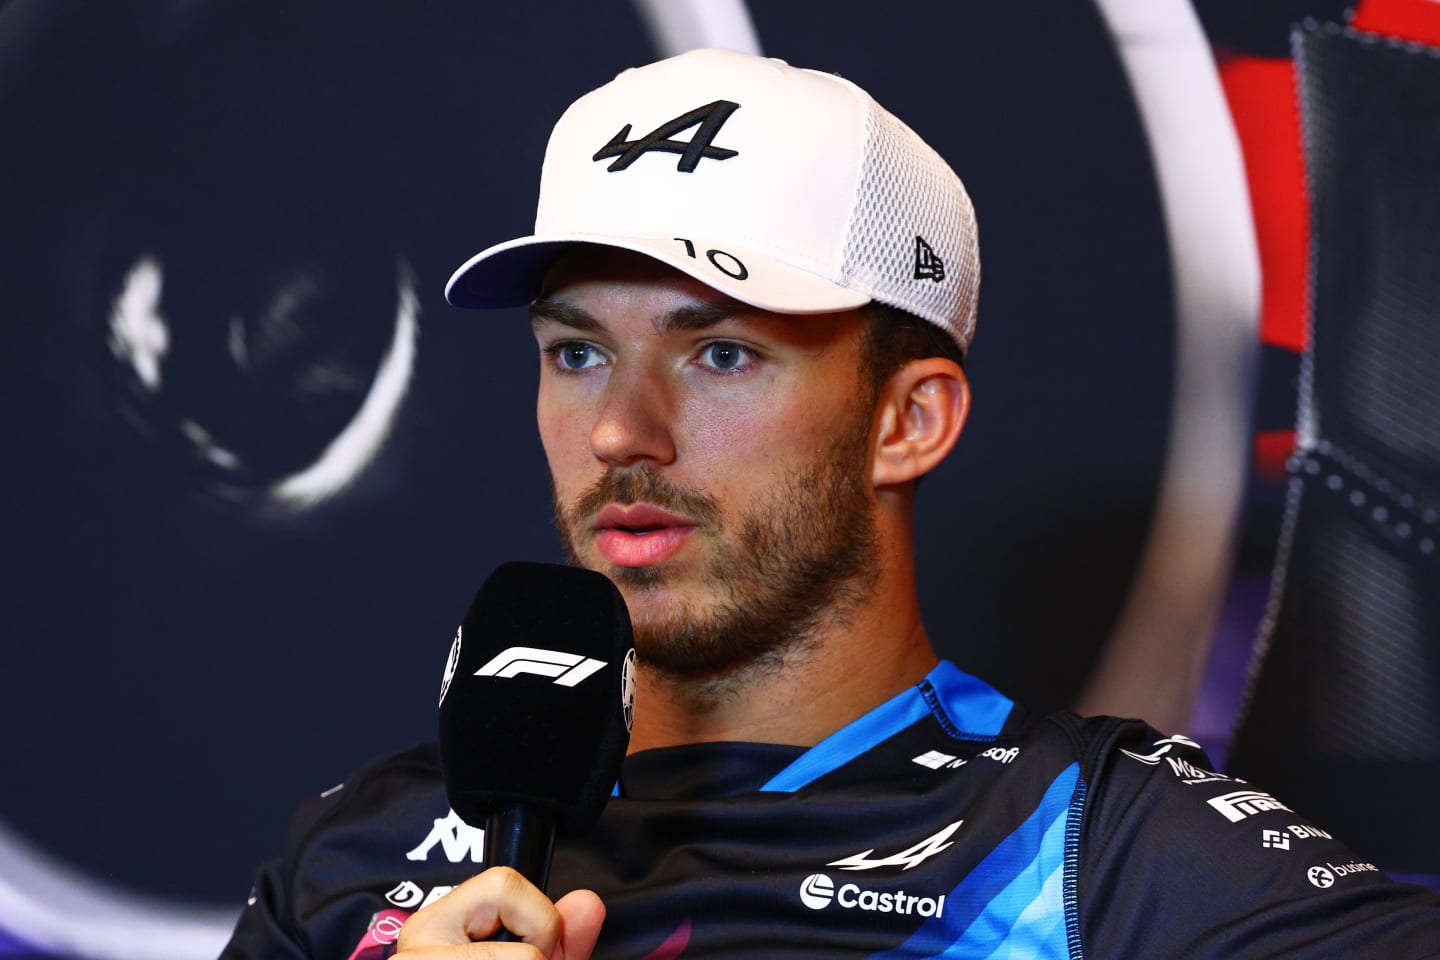 MONTREAL, QUEBEC - JUNE 06: Pierre Gasly of France and Alpine F1 attends the press conference during previews ahead of the F1 Grand Prix of Canada at Circuit Gilles Villeneuve on June 06, 2024 in Montreal, Quebec. (Photo by Clive Rose/Getty Images)